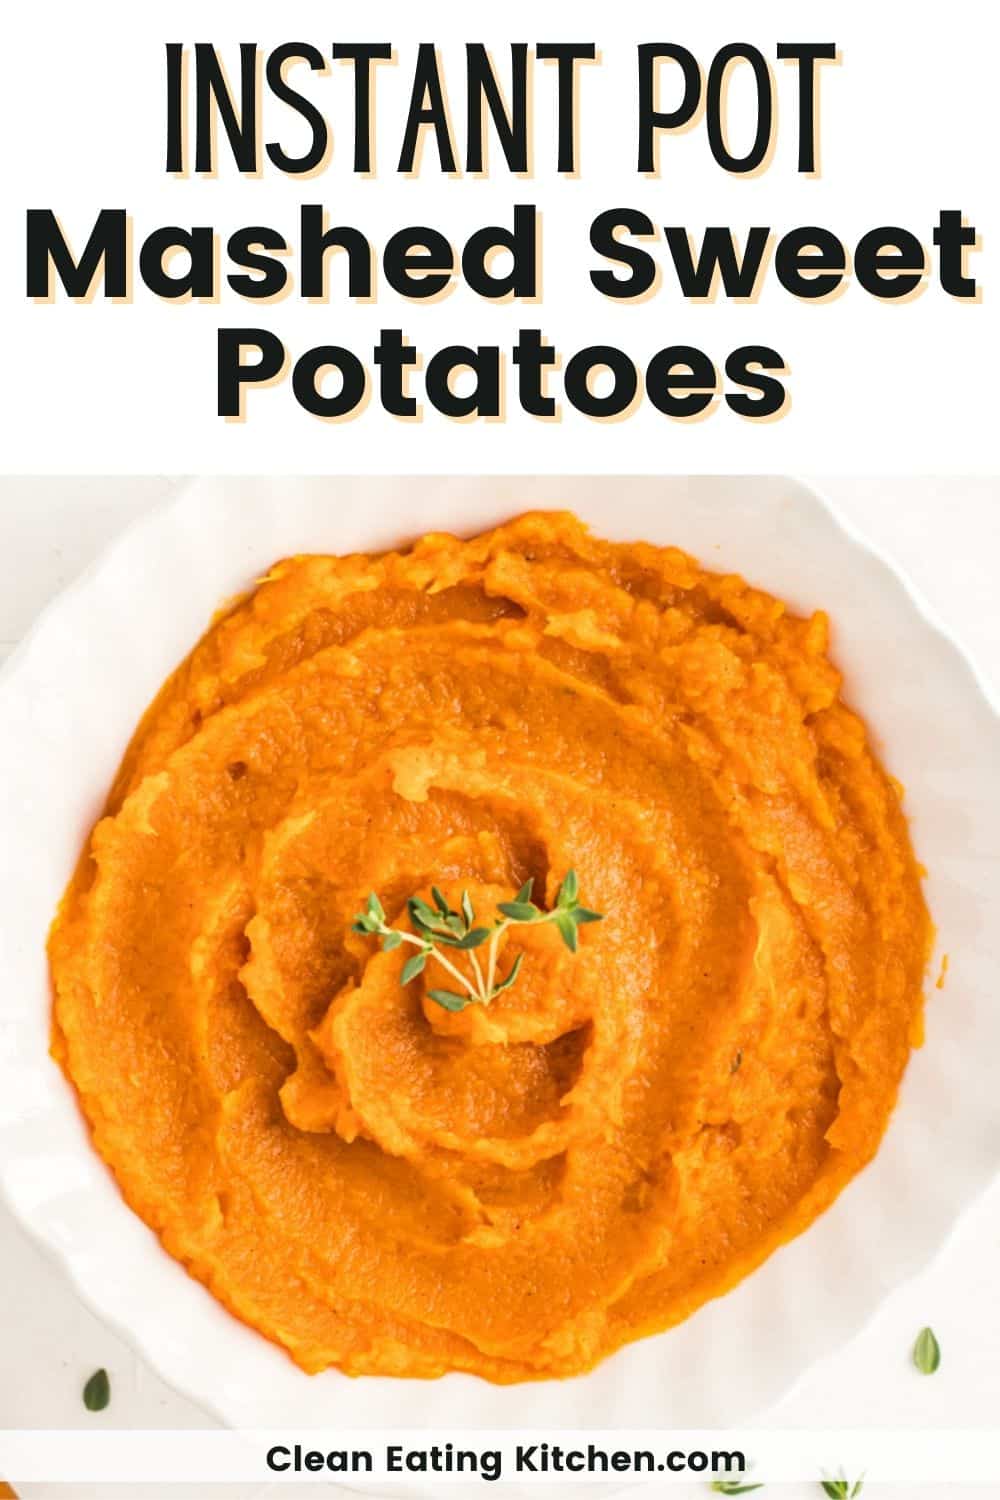 Instant Pot Mashed Sweet Potatoes (30 Minute Recipe)